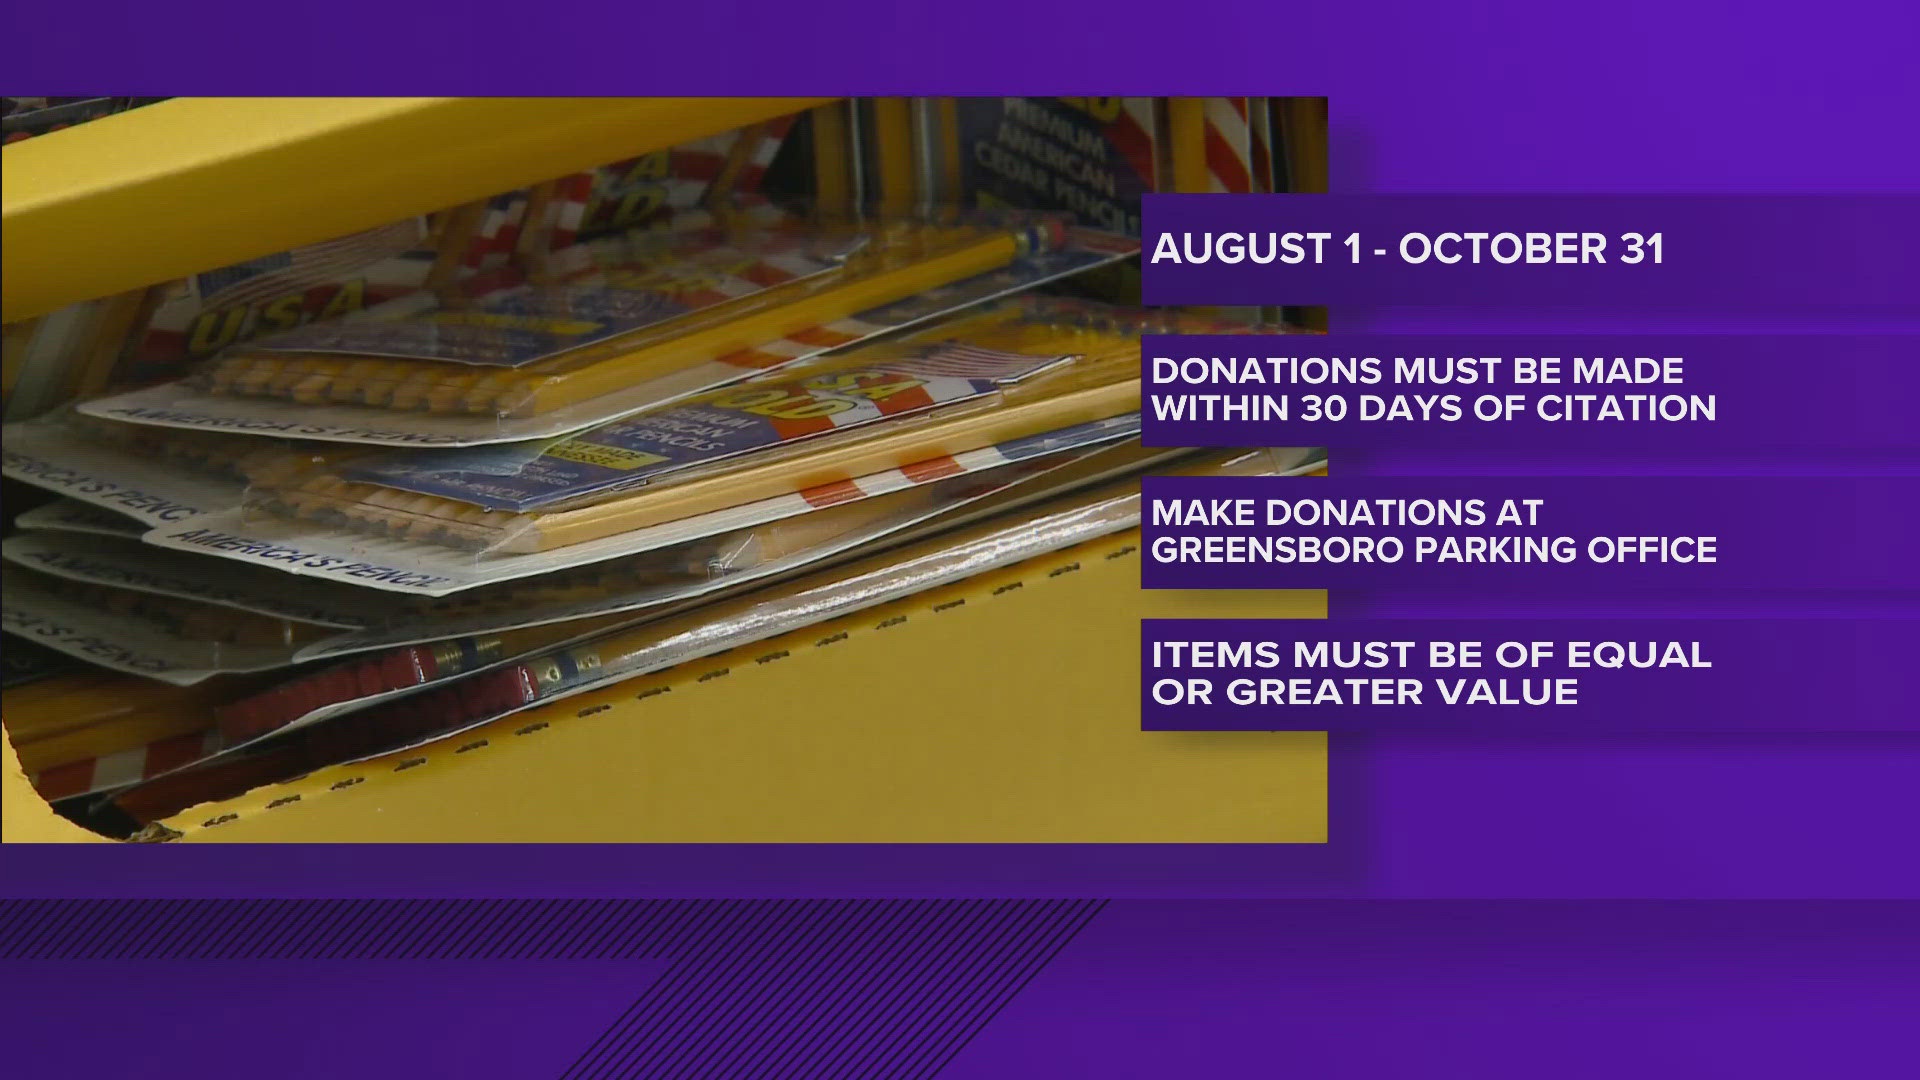 The city suggests that donations to be made within 30 days of the infraction.